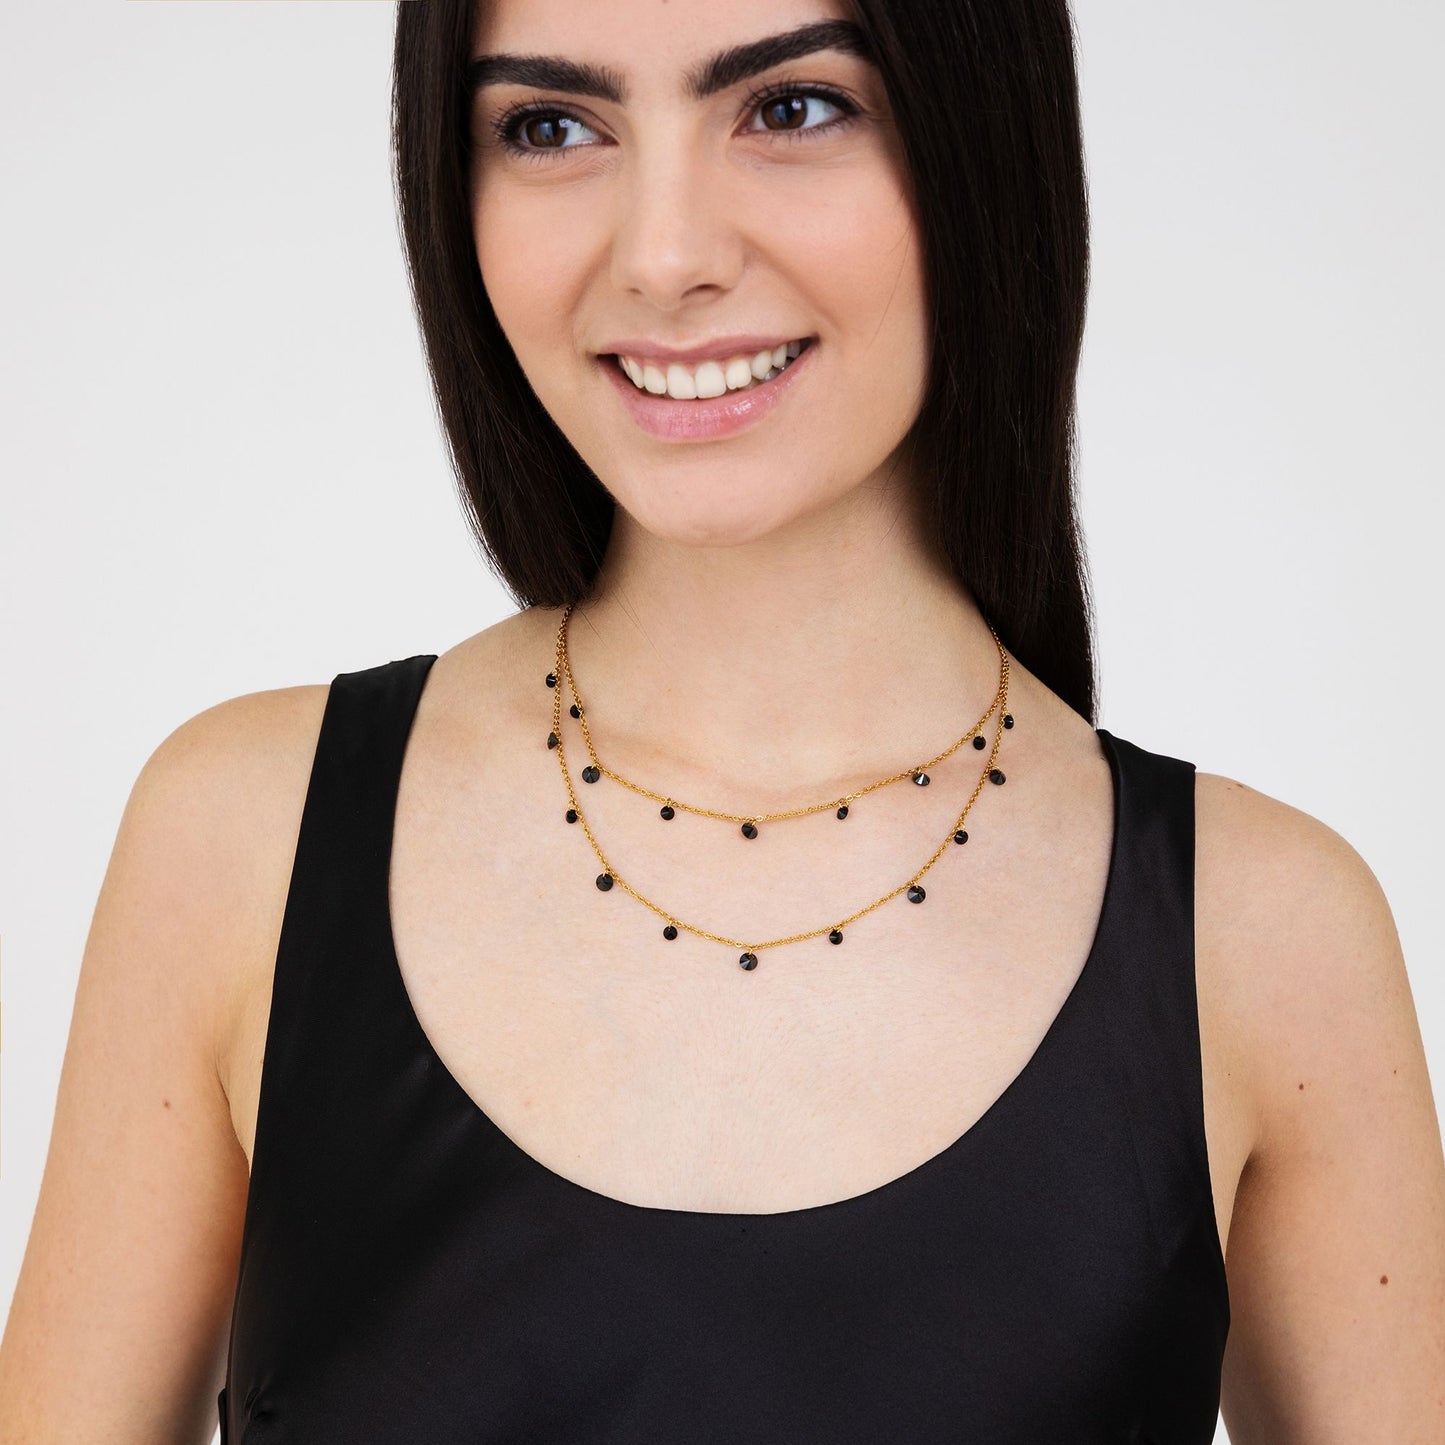 WOMAN'S NECKLACE IN IP GOLD STEEL WITH BLACK CRYSTALS Luca Barra